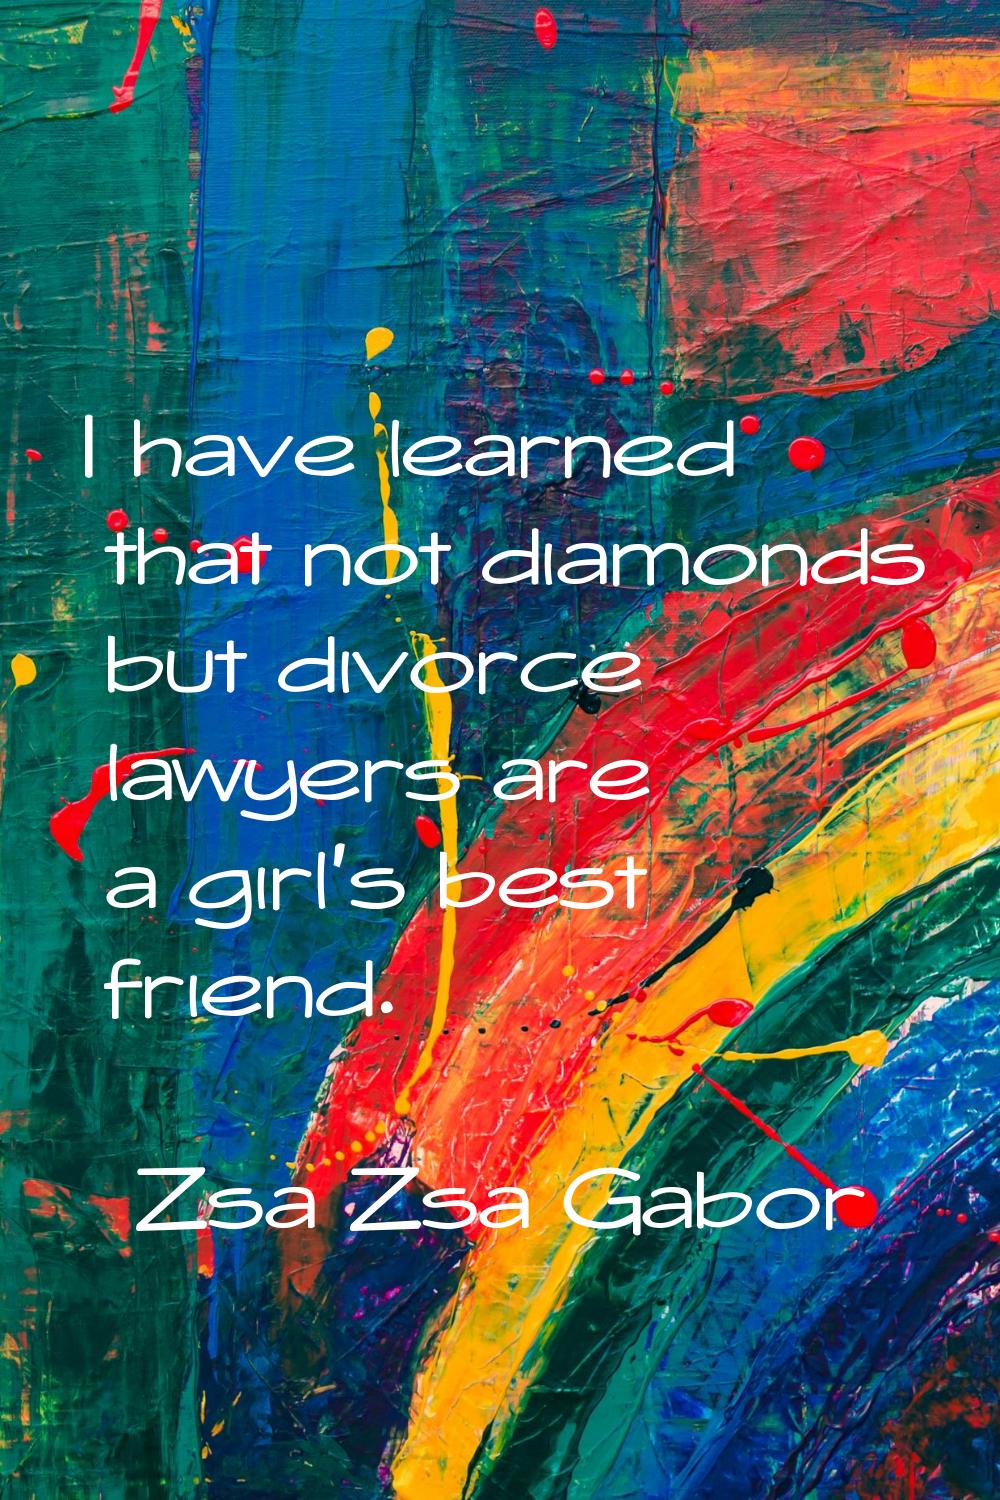 I have learned that not diamonds but divorce lawyers are a girl's best friend.